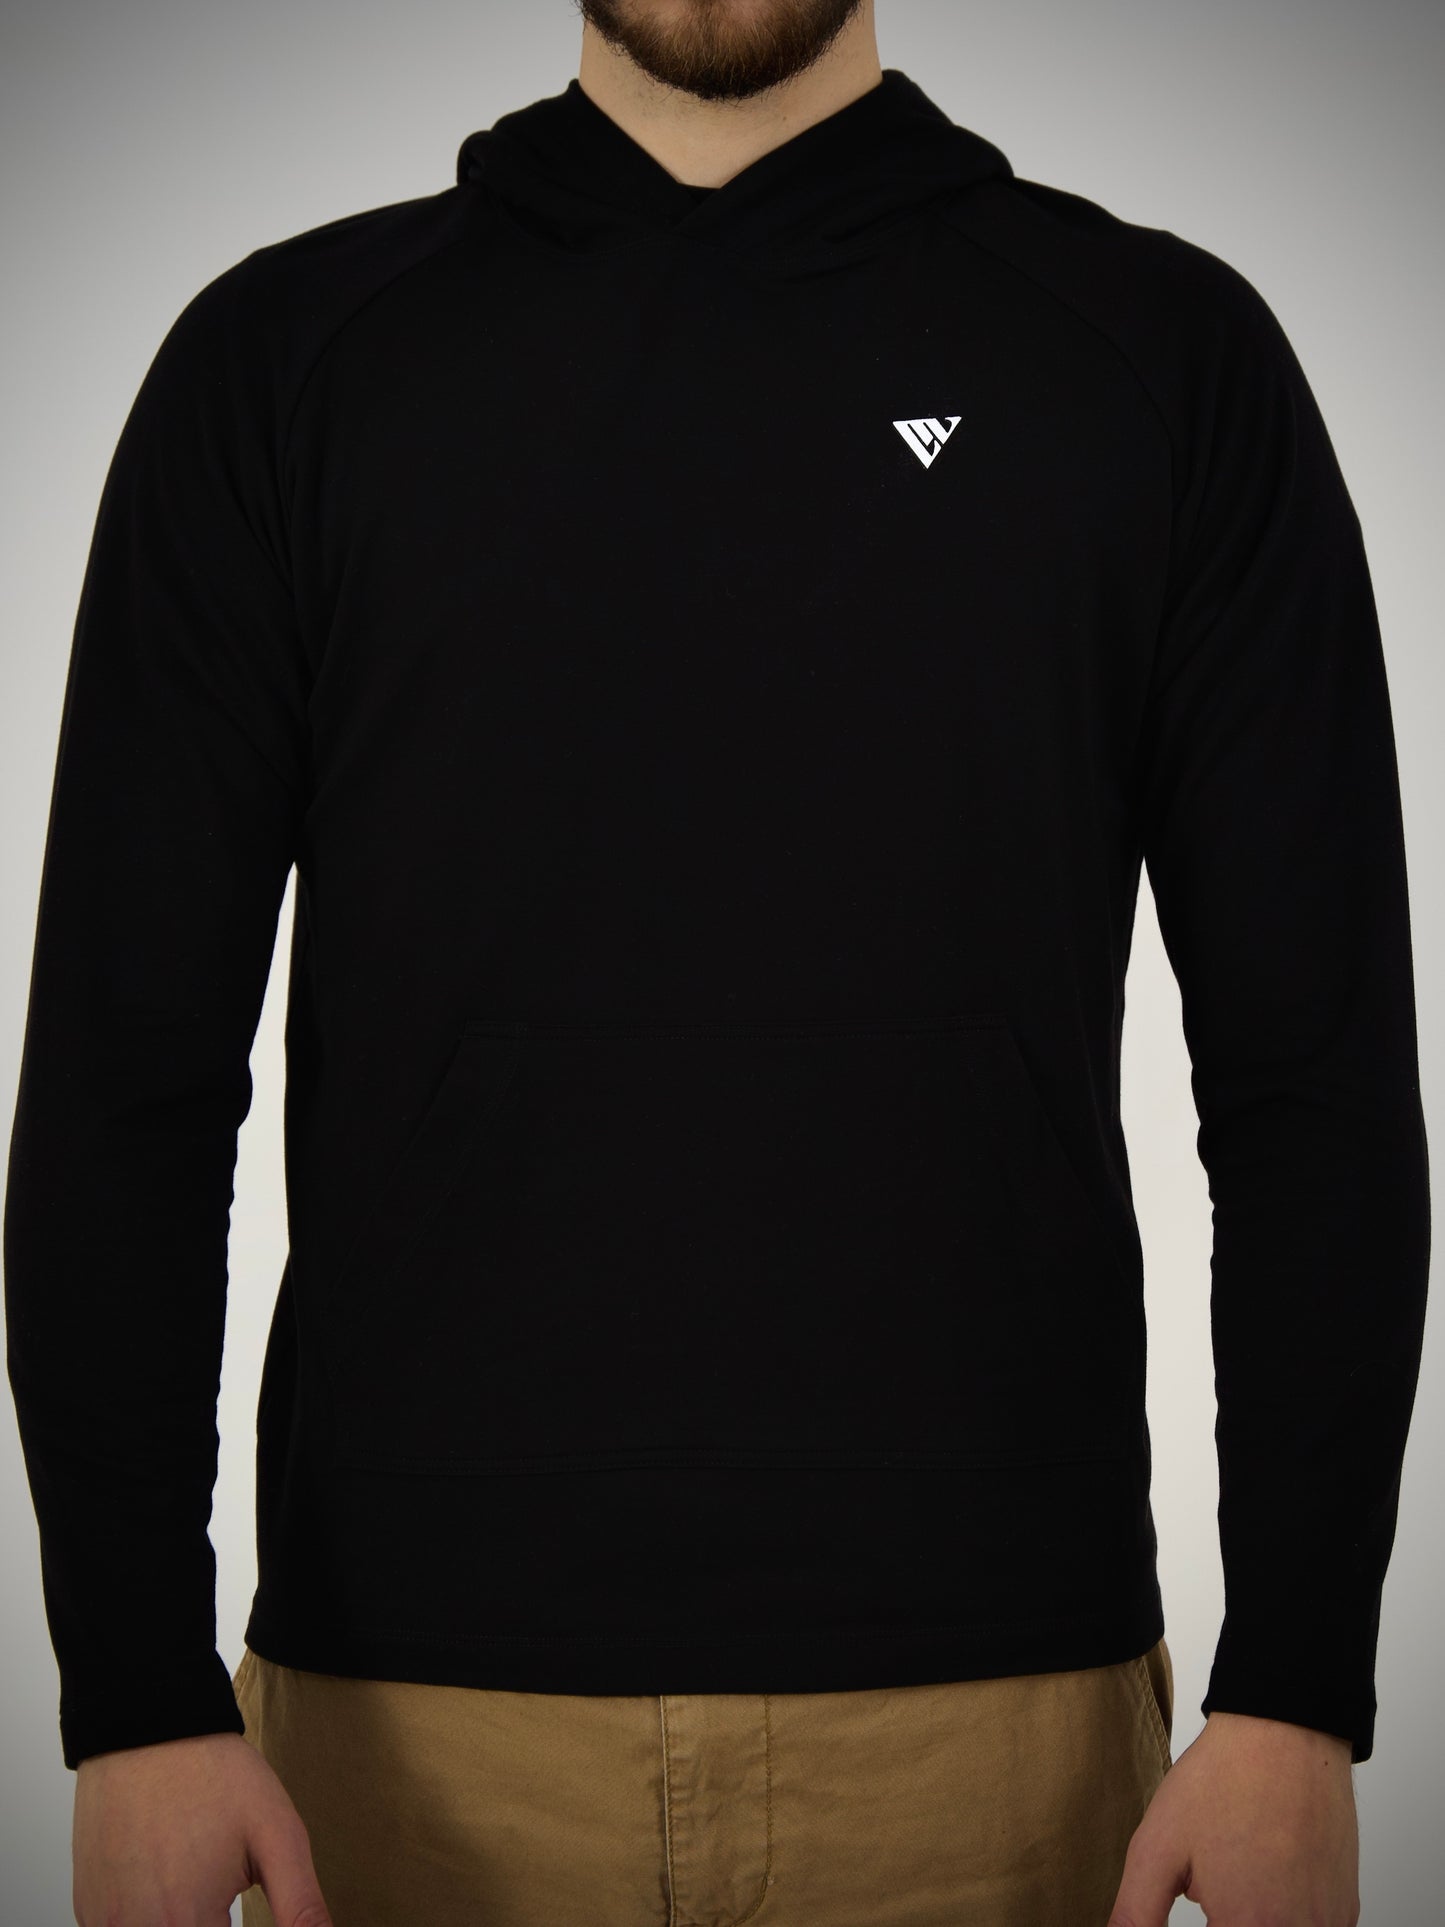 Evade Hoodie pour homme